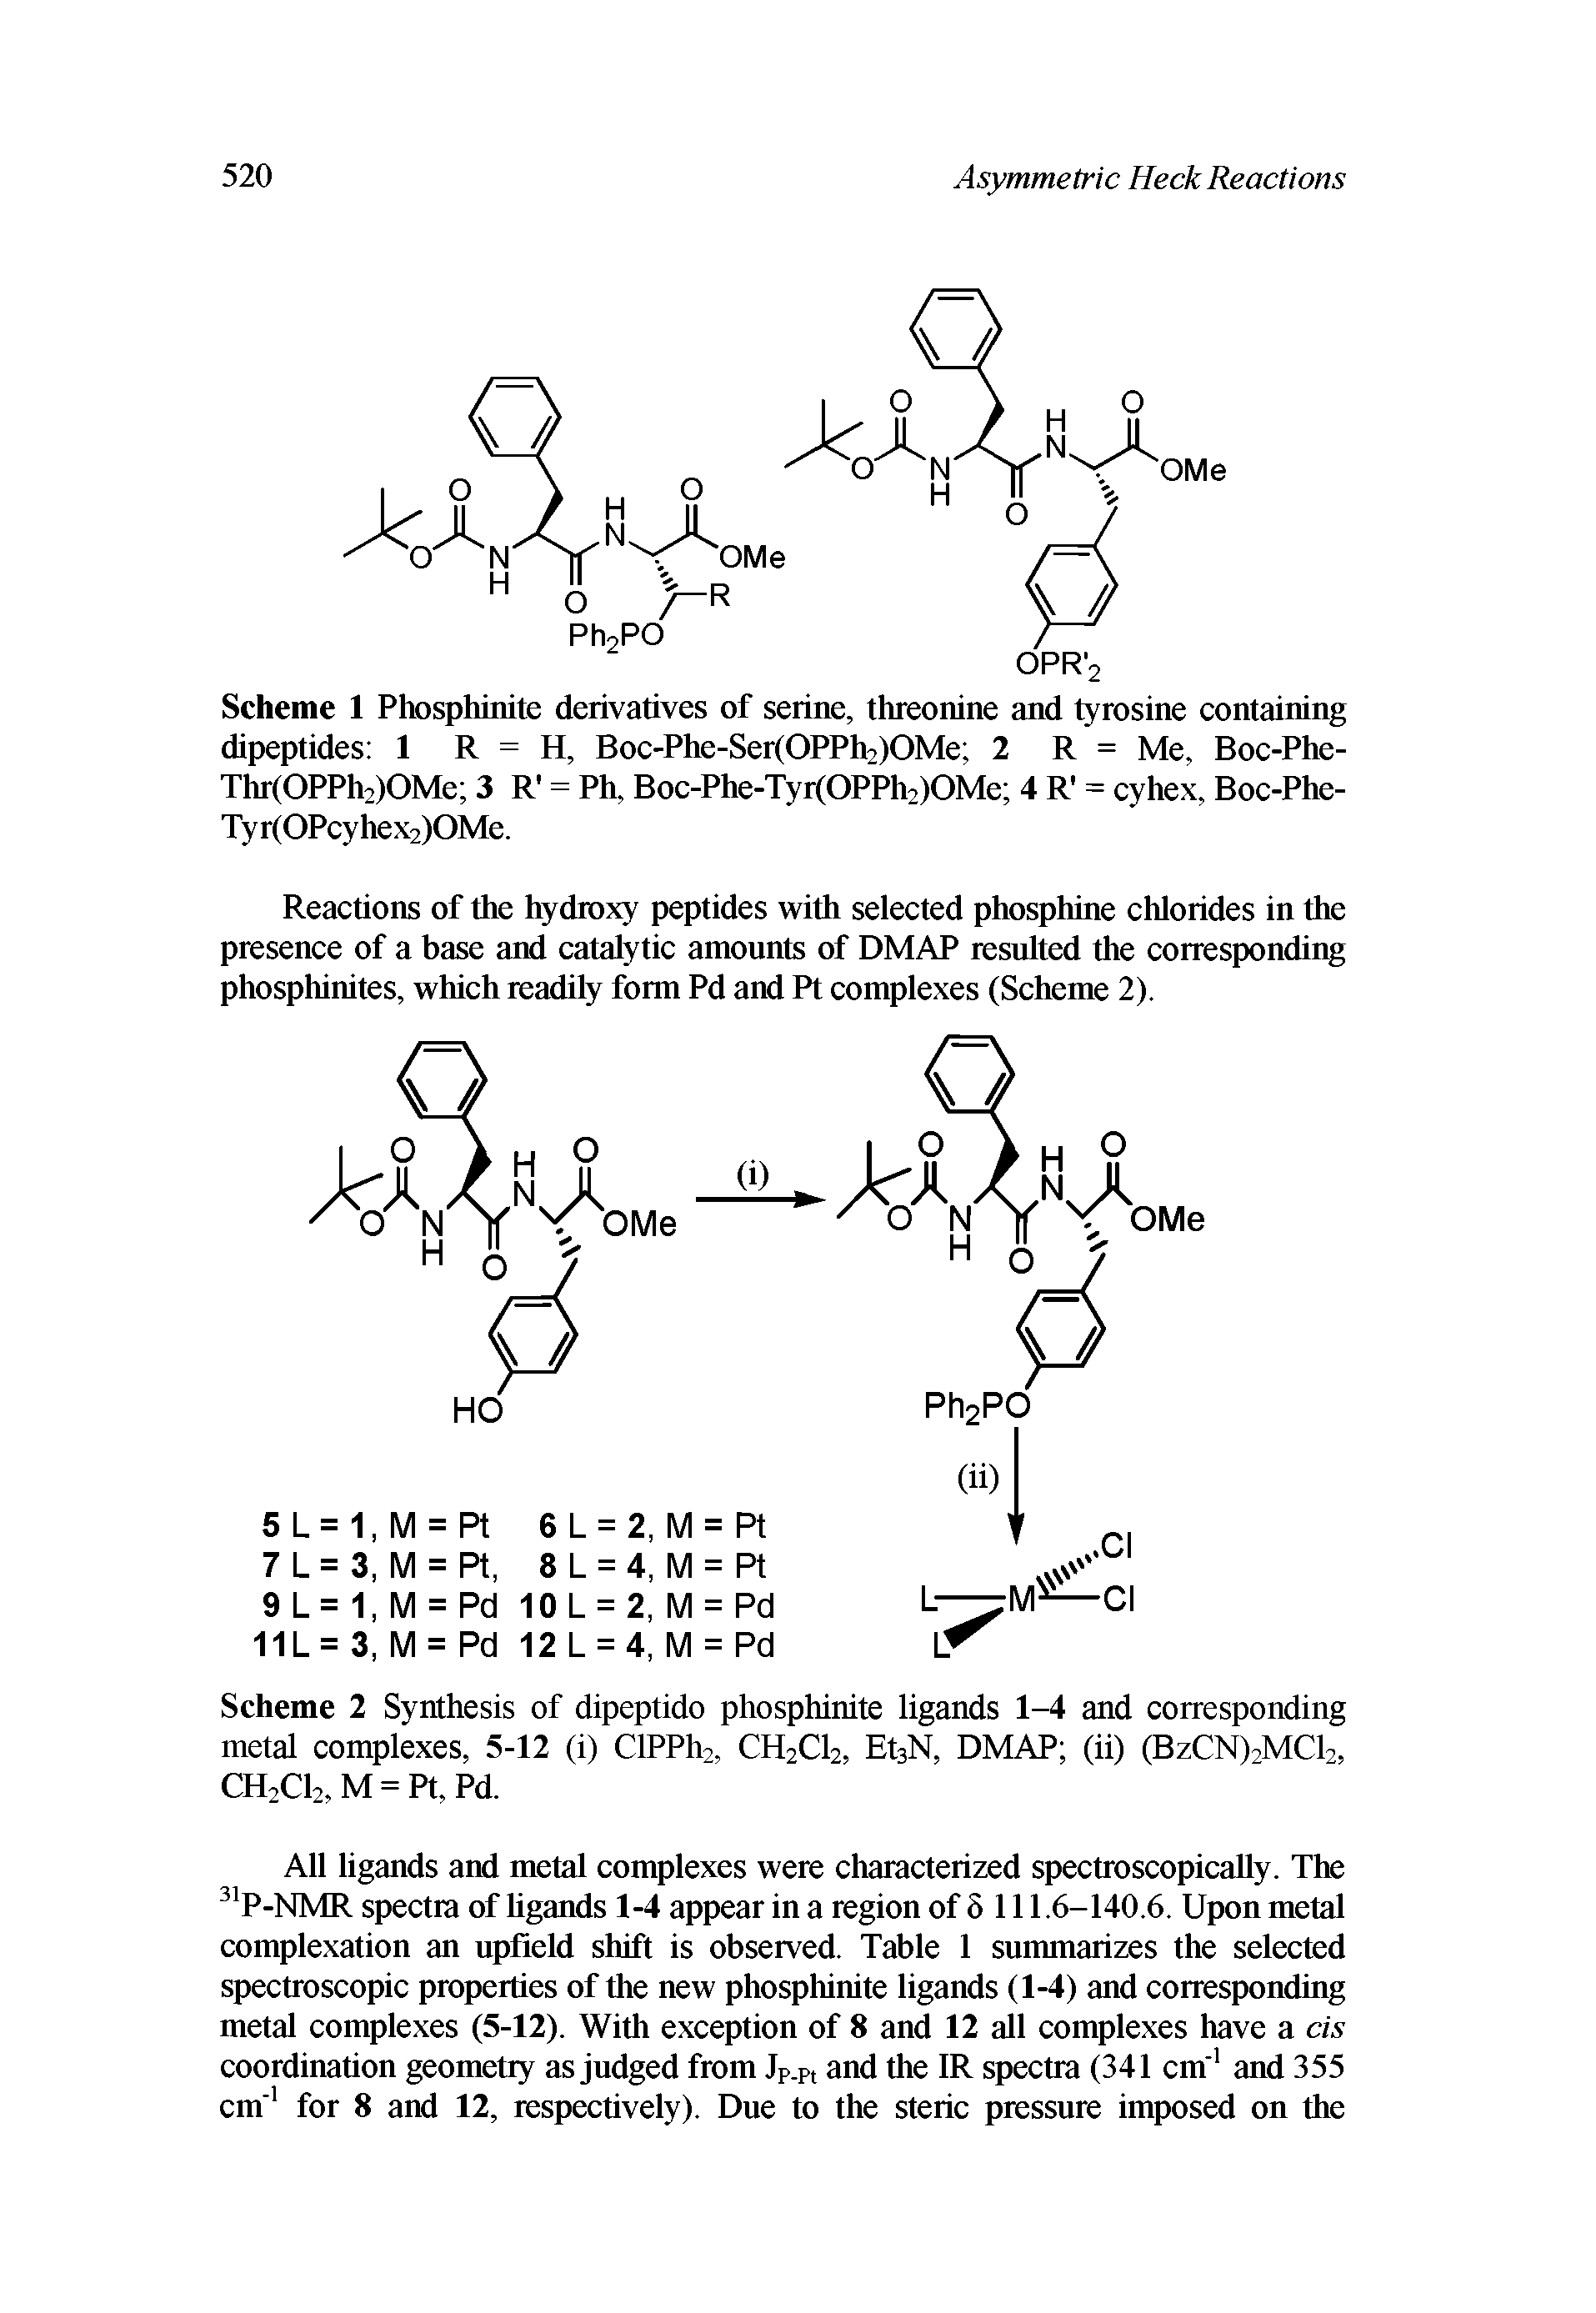 Scheme 2 Synthesis of dipeptido phosphinite ligands 1-4 and corresponding metal complexes, 5-12 (i) ClPPh2, CH2C12, Et3N, DMAP (ii) (BzCN)2MC12, CH2C12, M = Pt, Pd.